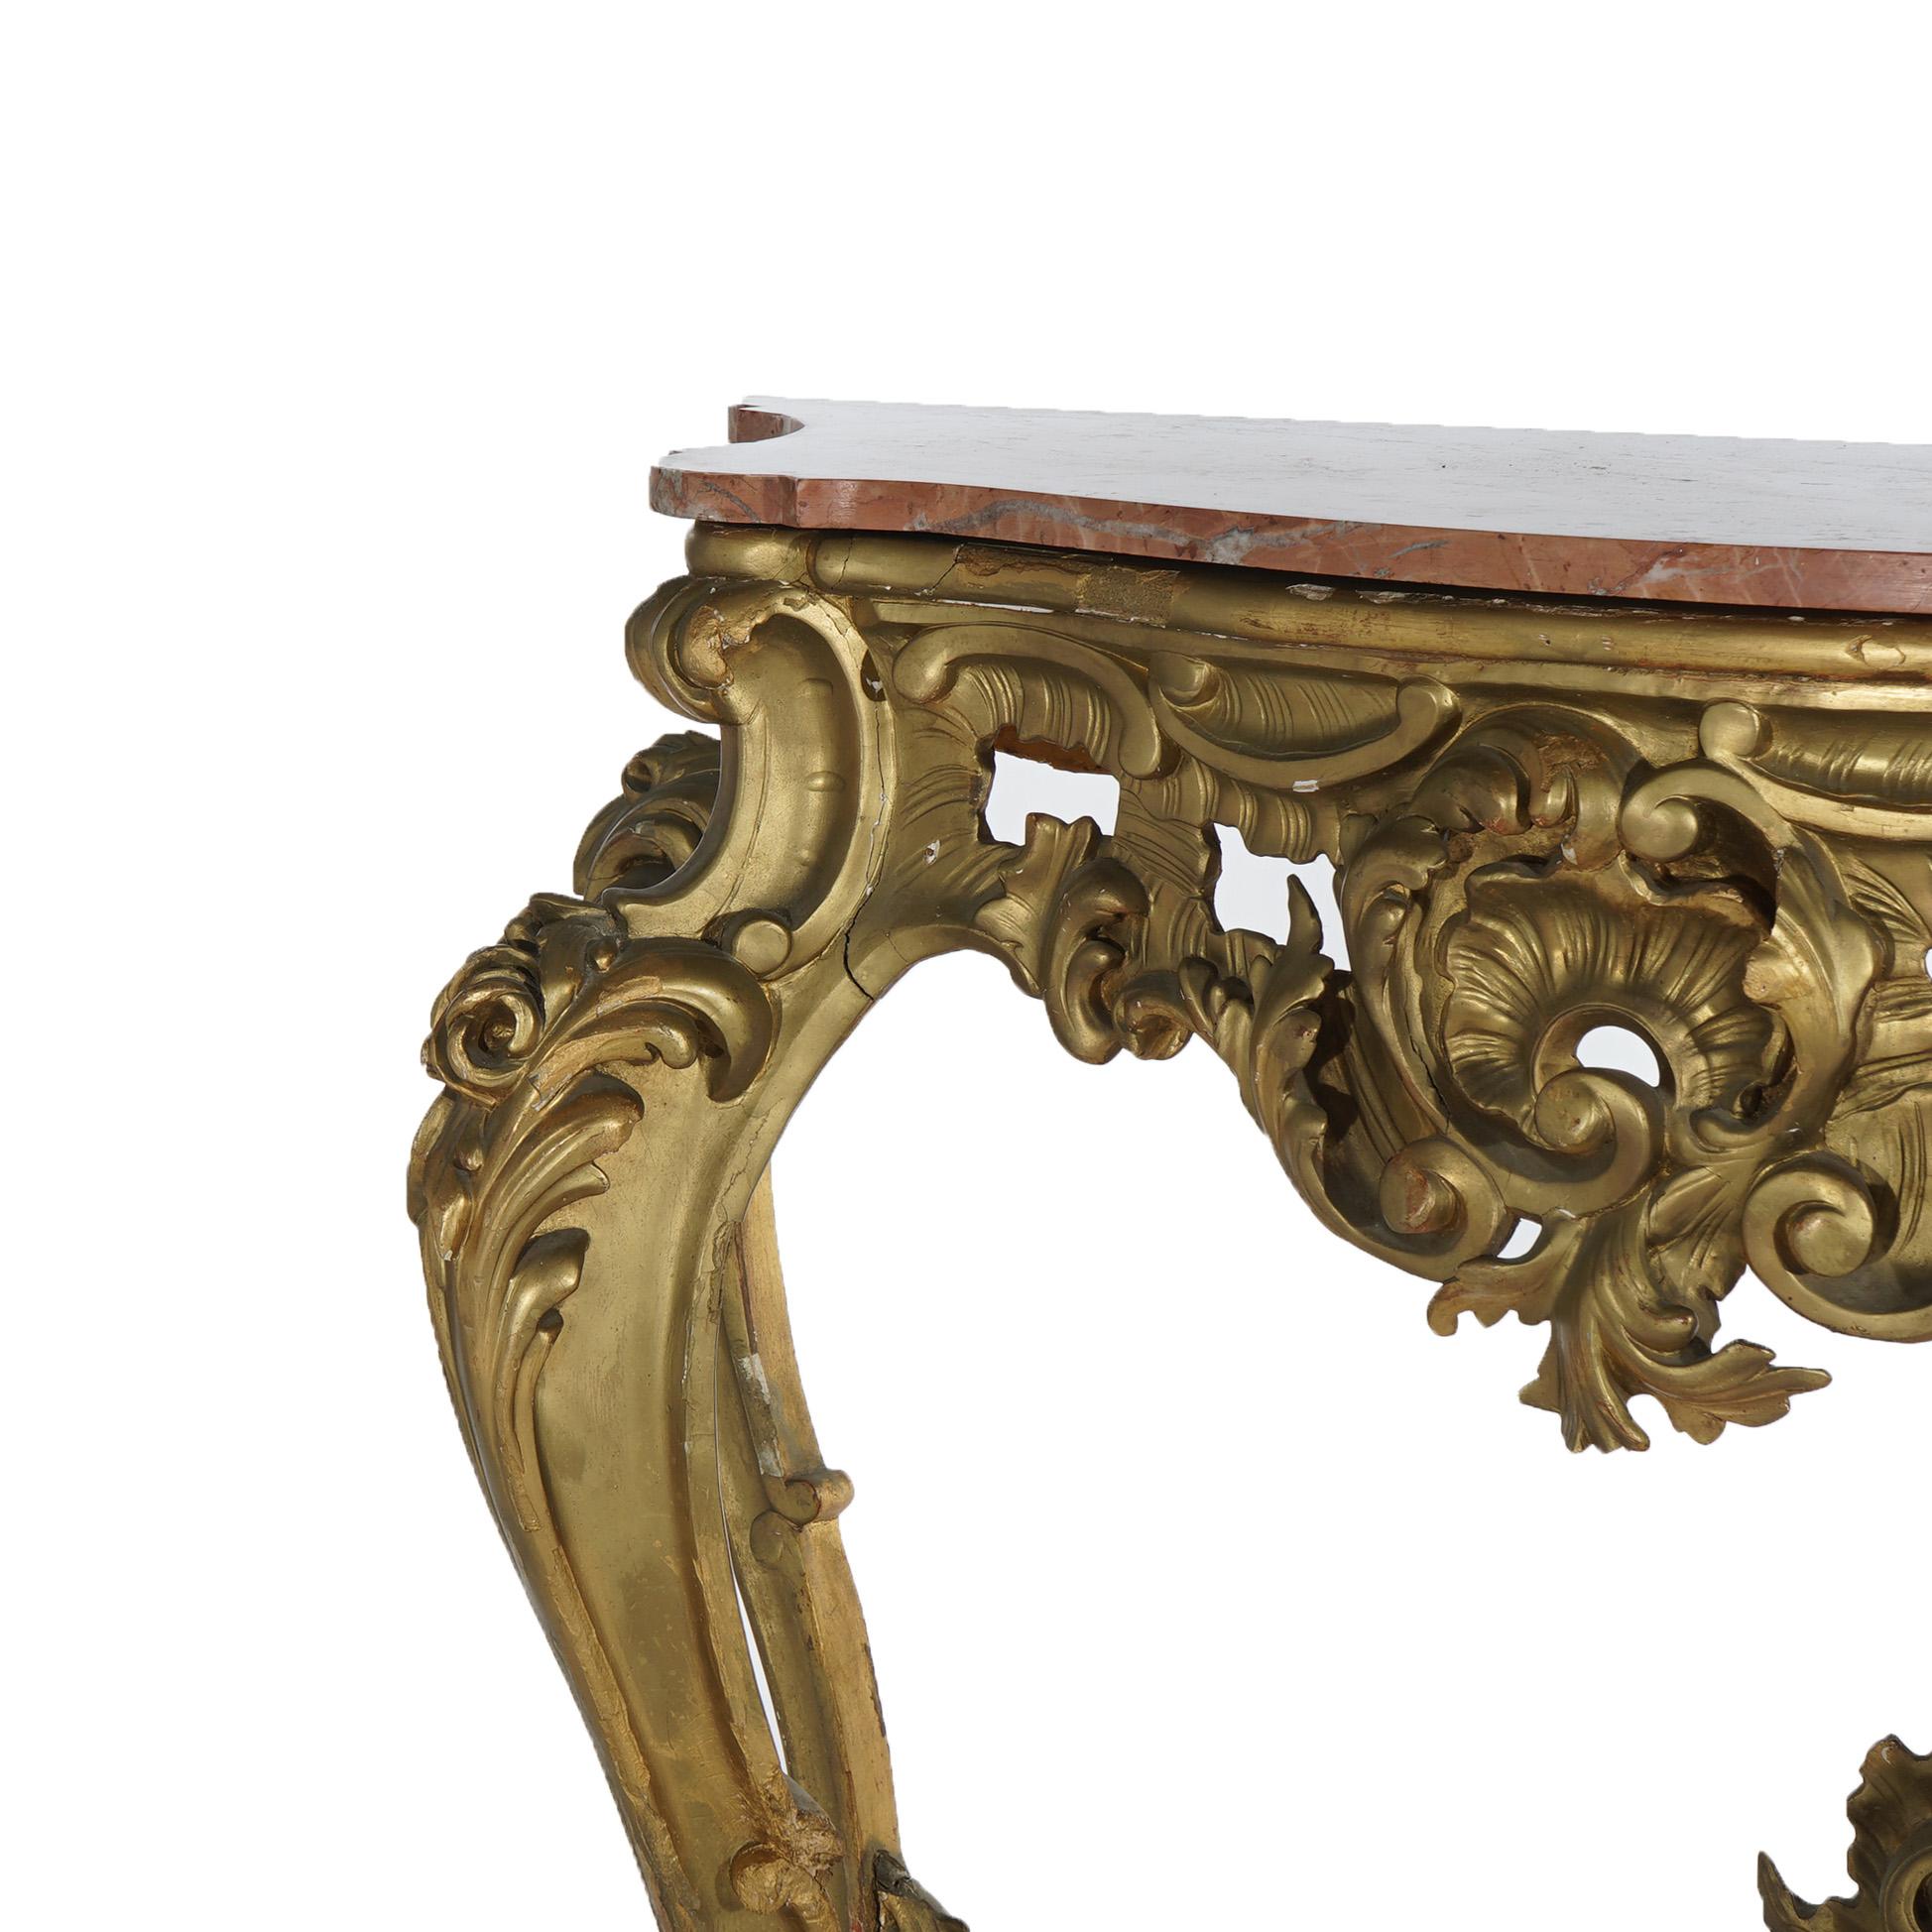 ***Ask About Reduced In-House Delivery Rates - Reliable Professional Service & Fully Insured***

Antique French Rococo Style Giltwood & Marble Top Console Table with Shaped Top, Foliate & Floral Elements, Raised on Cabriole Legs with Asymmetric